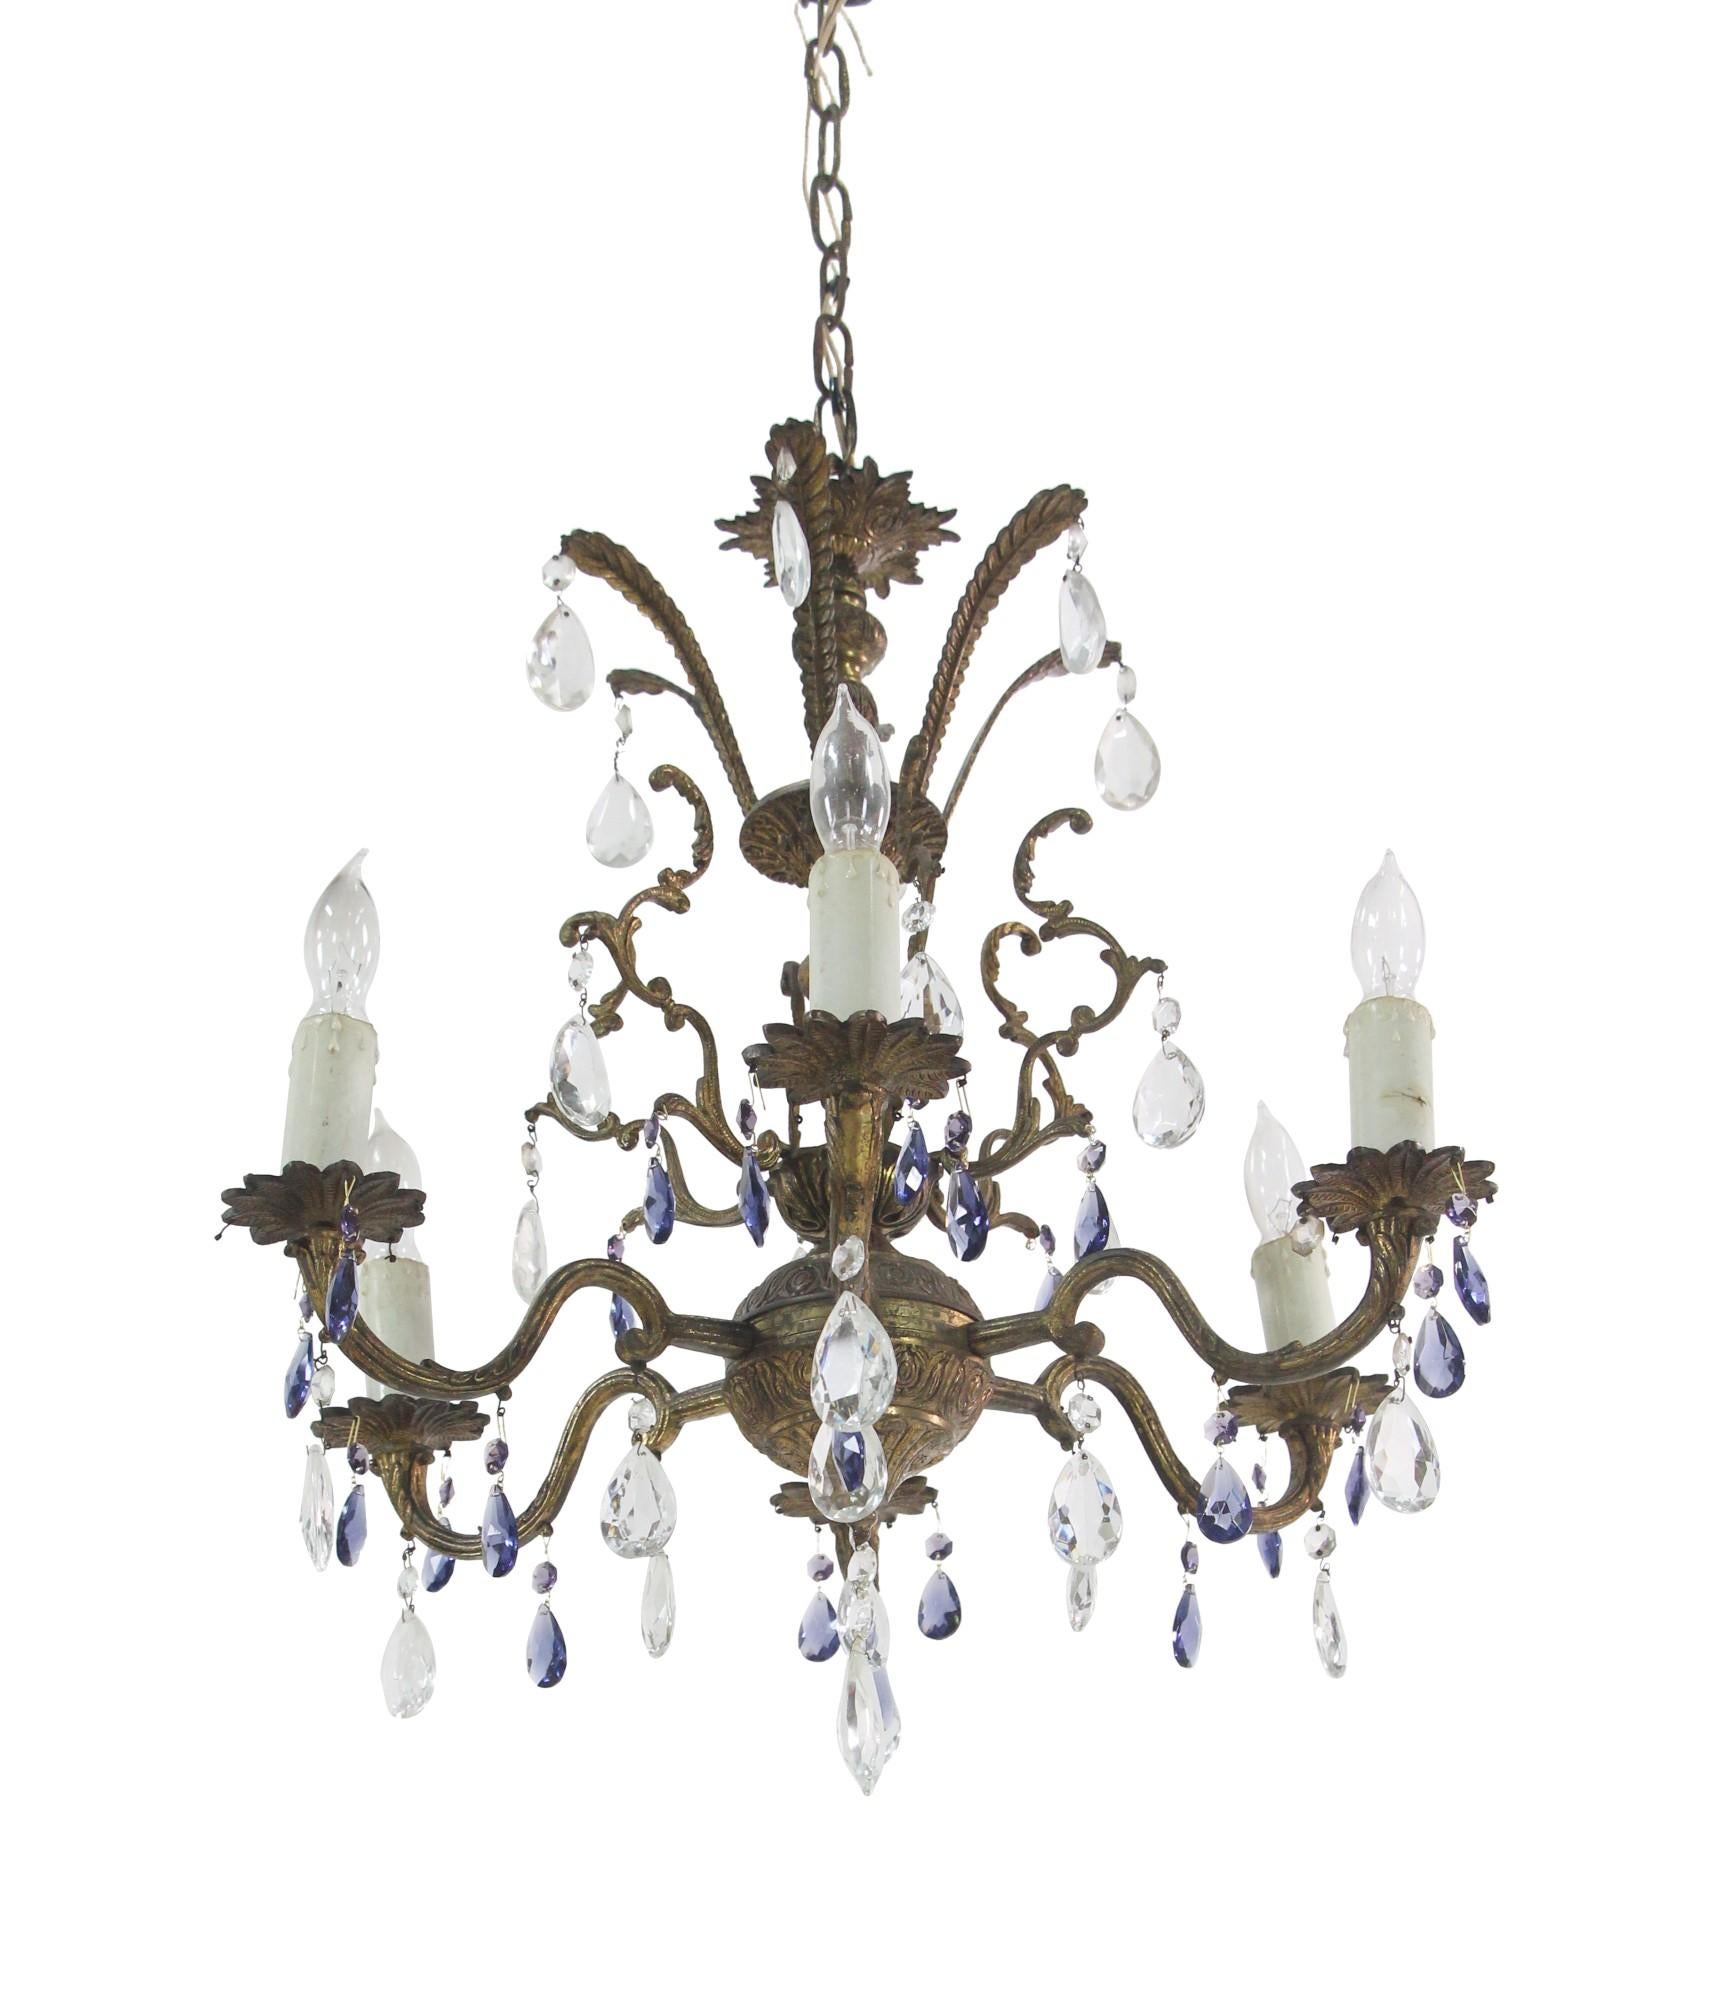 Restored ornate bronze Spanish chandelier featuring both blue and clear crystals. Each of the six arms has a single light each. Please note, this item is located in our Los Angeles location.